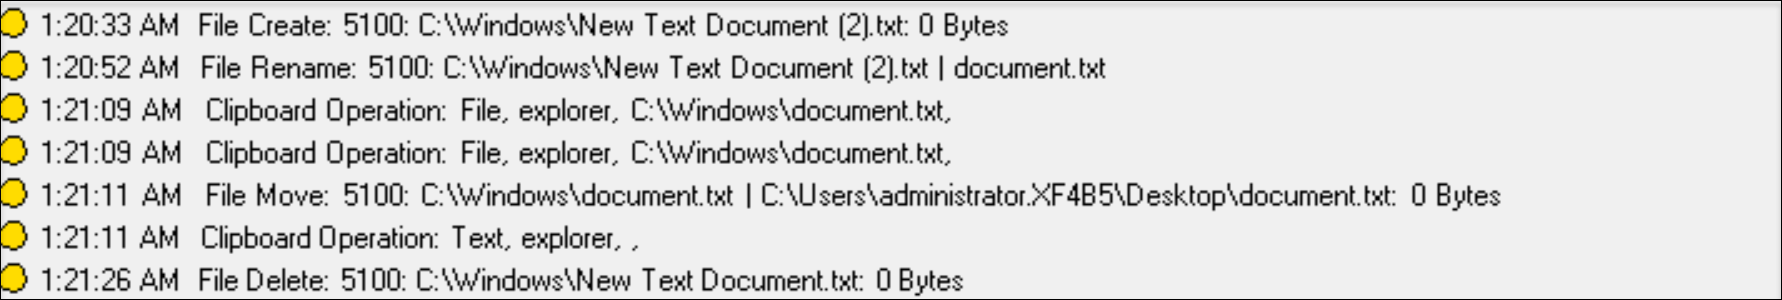 File operations